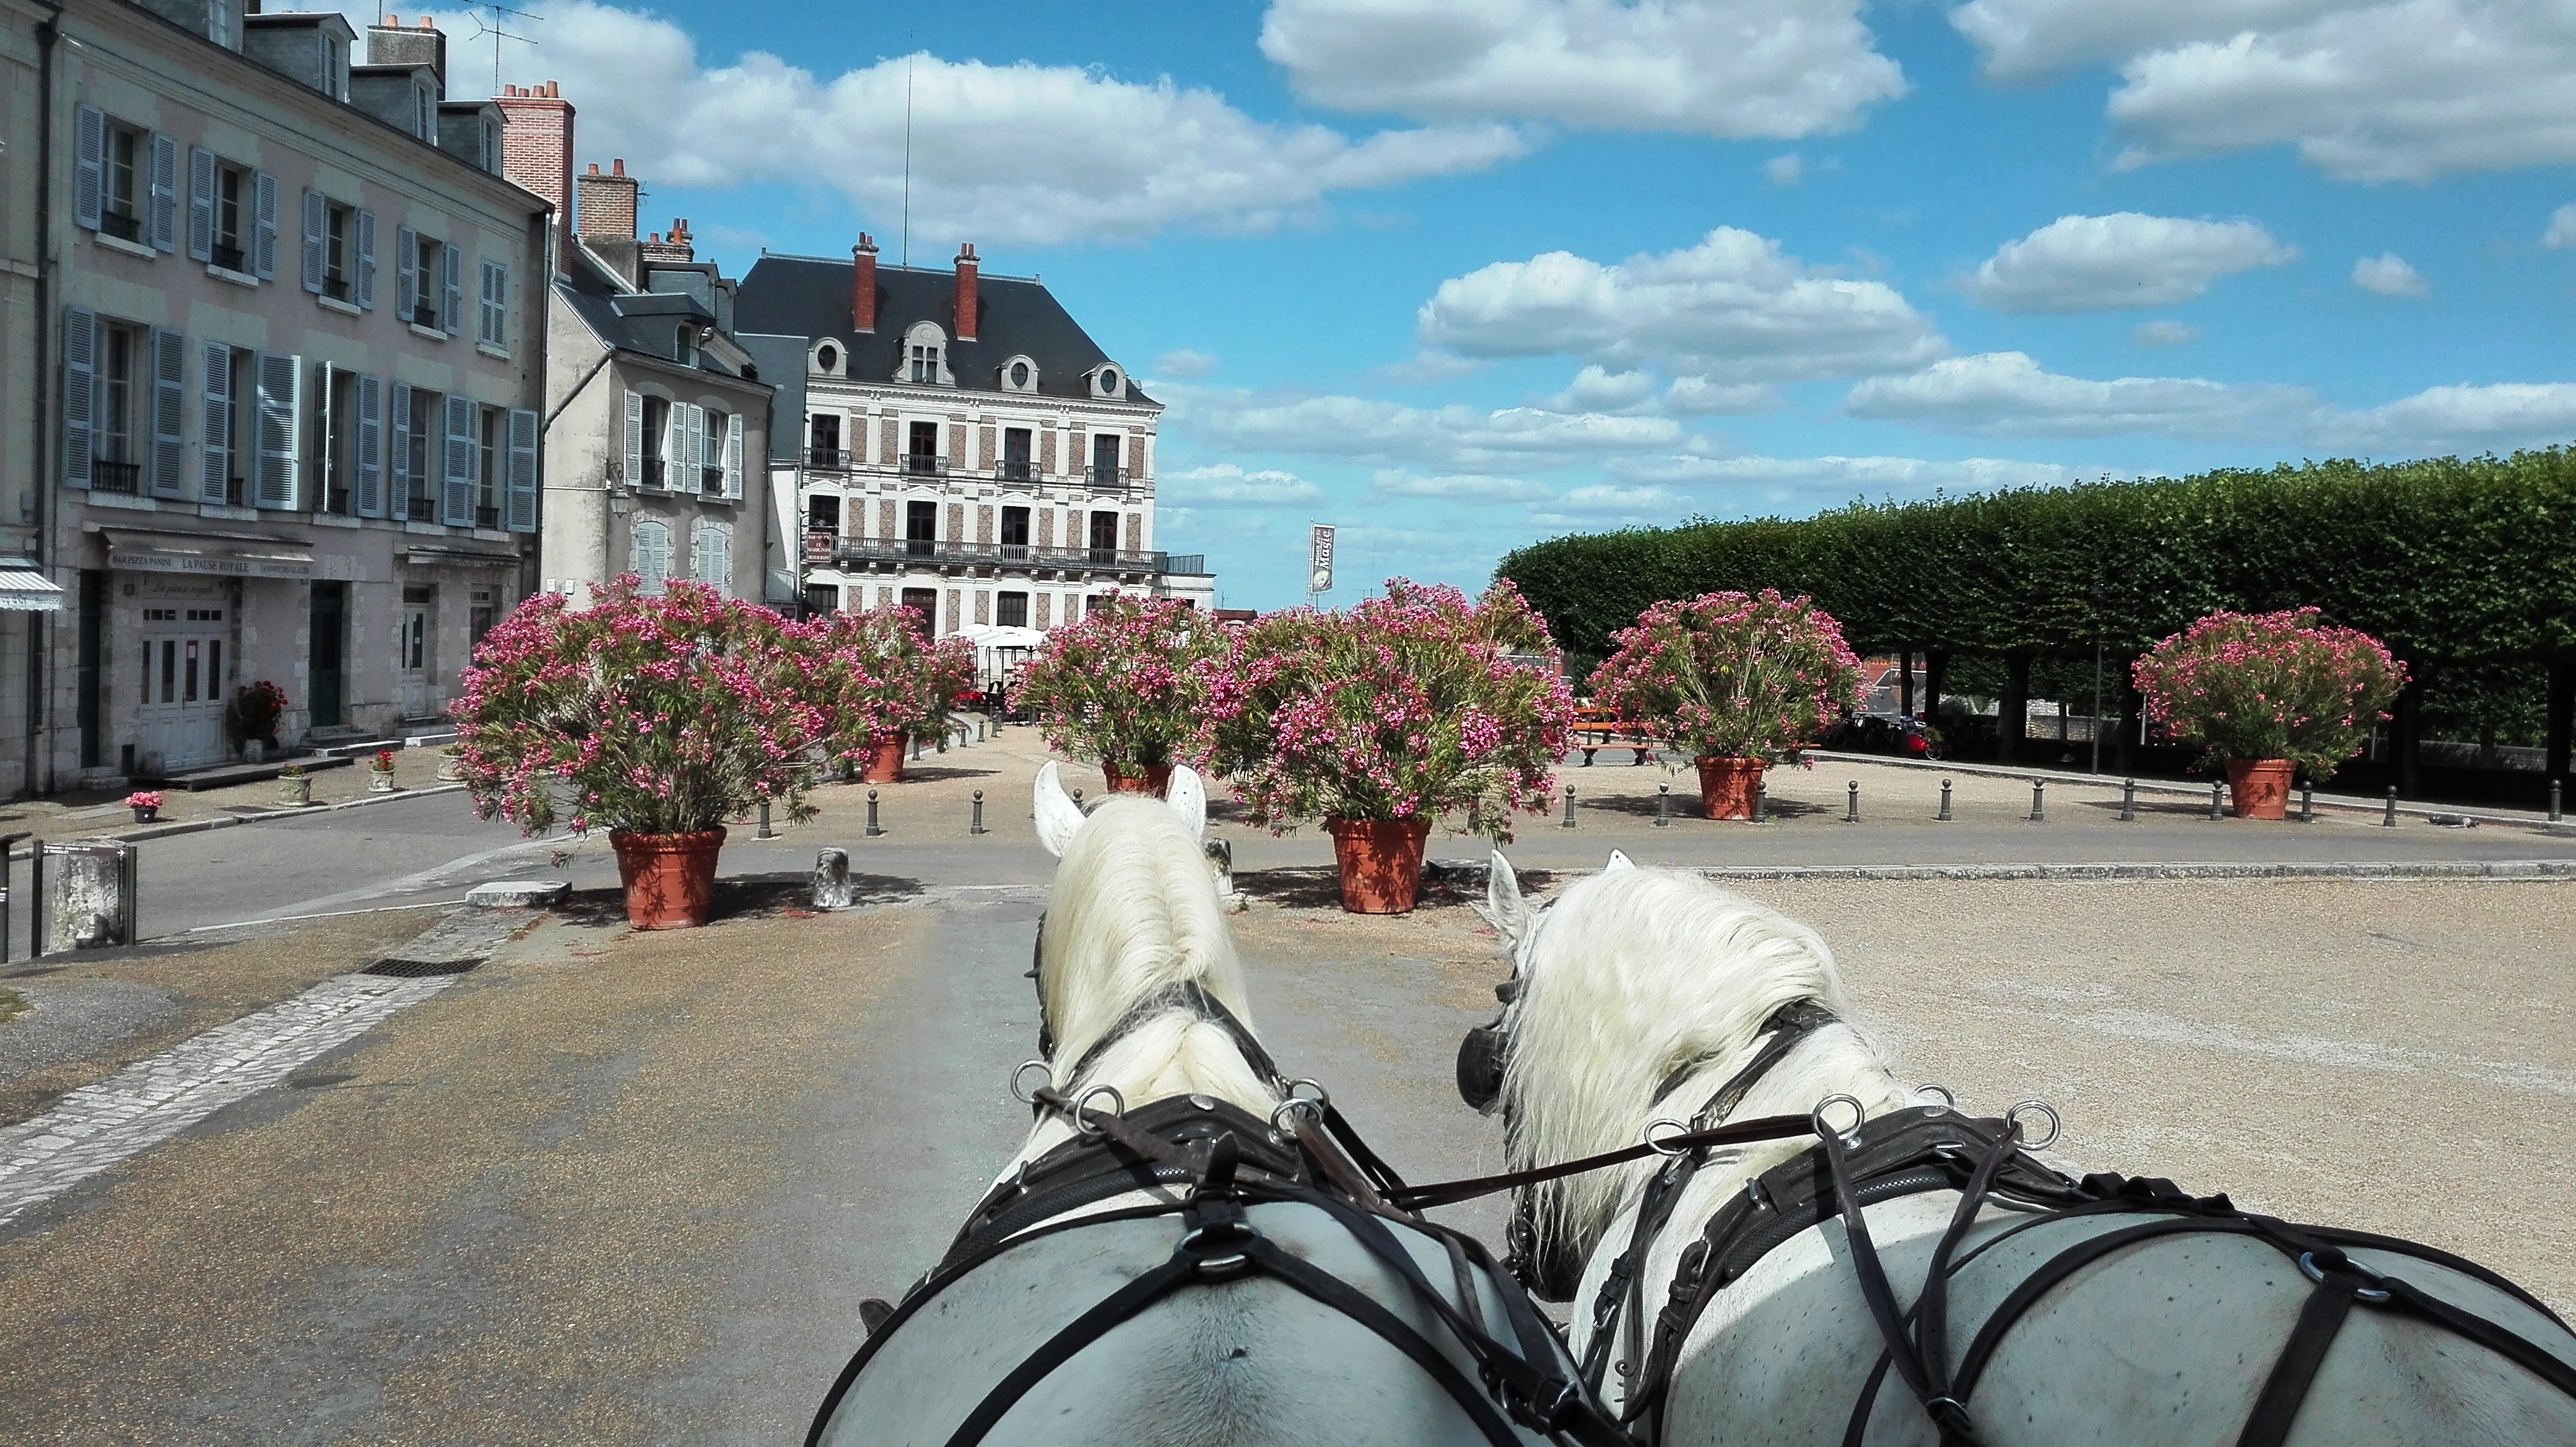 Visit of the old town by horse-drawn carriage©